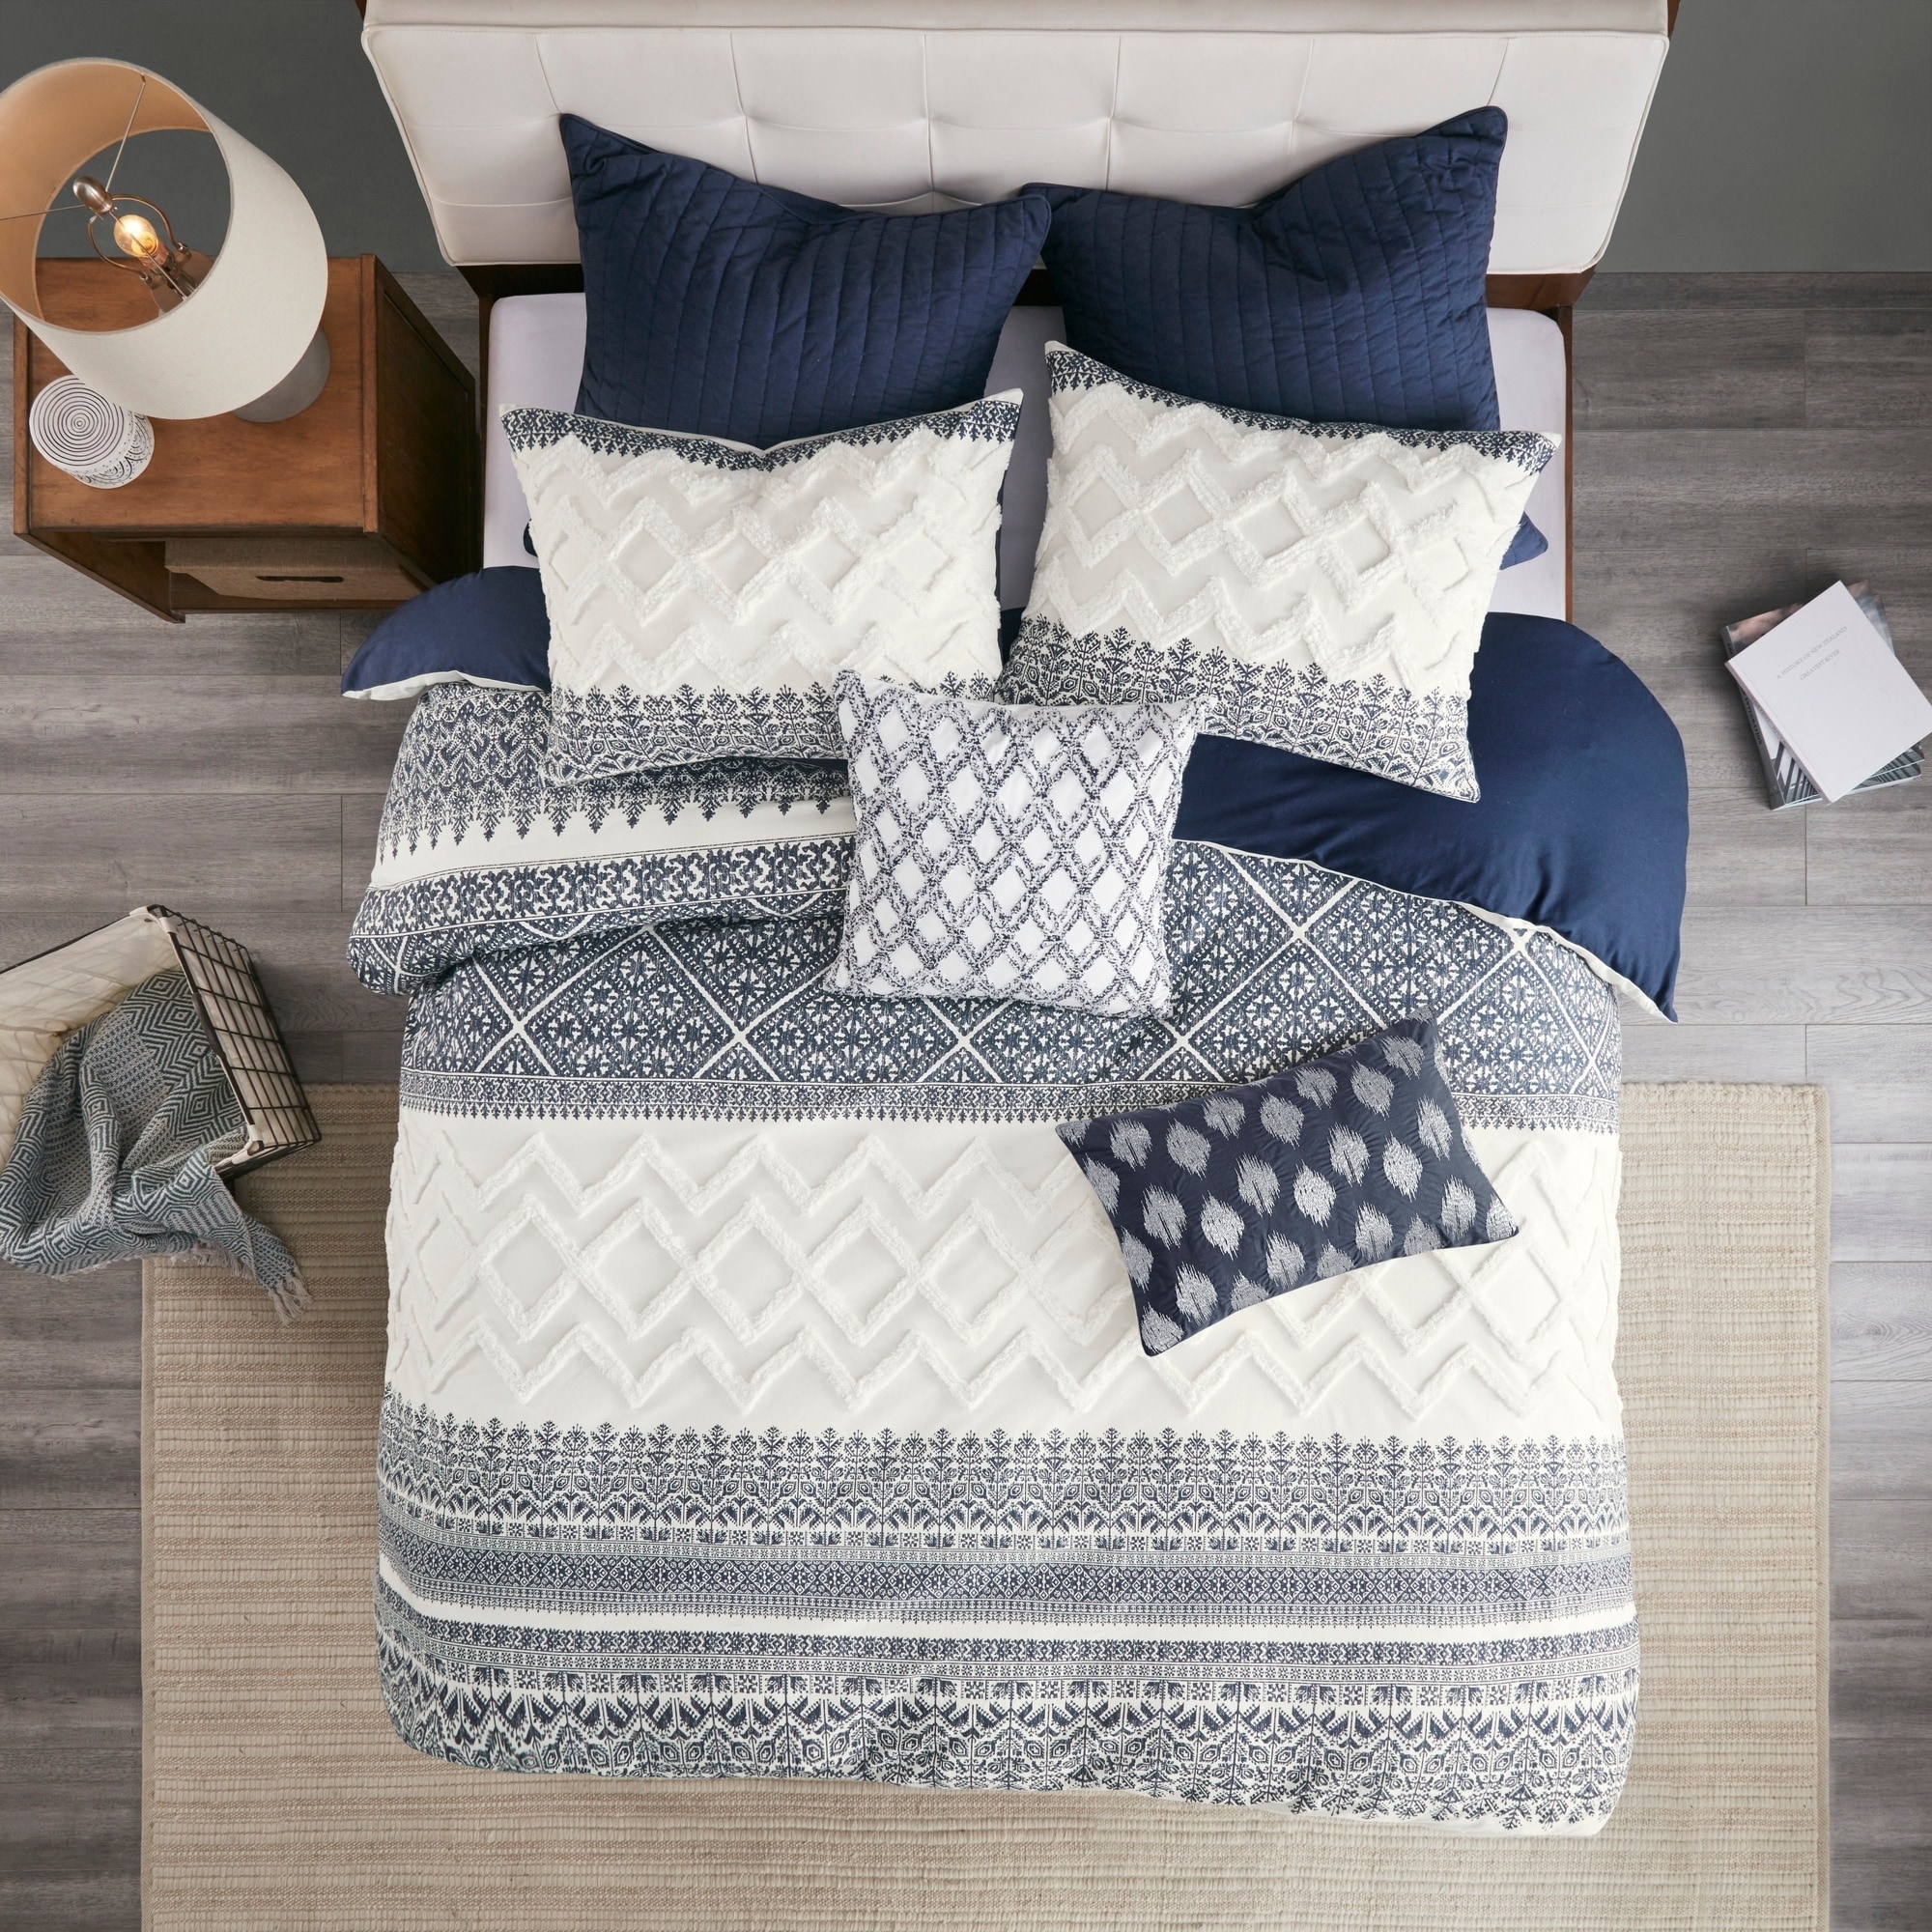 Shop The Curated Nomad Natoma Navy Cotton Chenille Printed Duvet